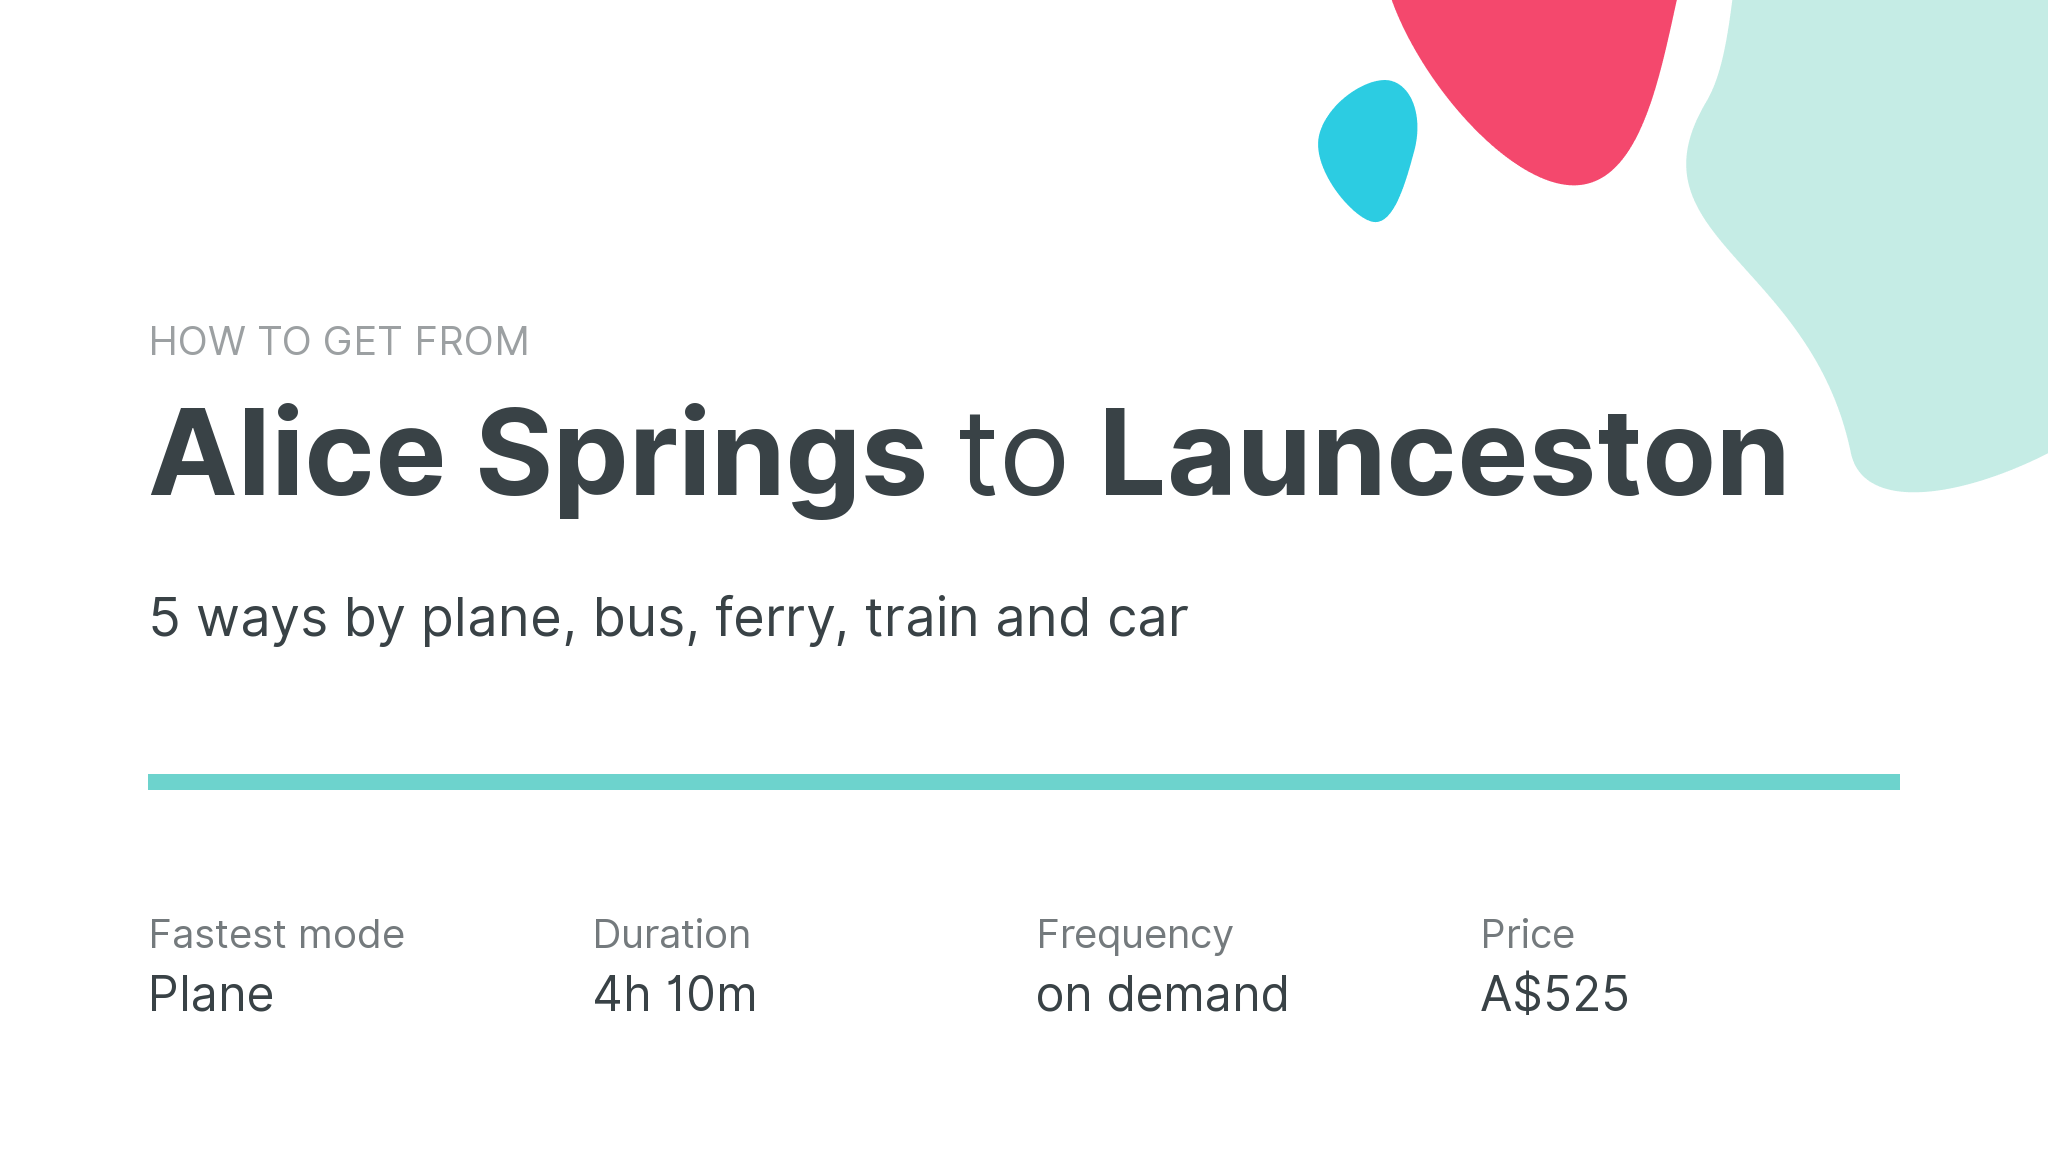 How do I get from Alice Springs to Launceston